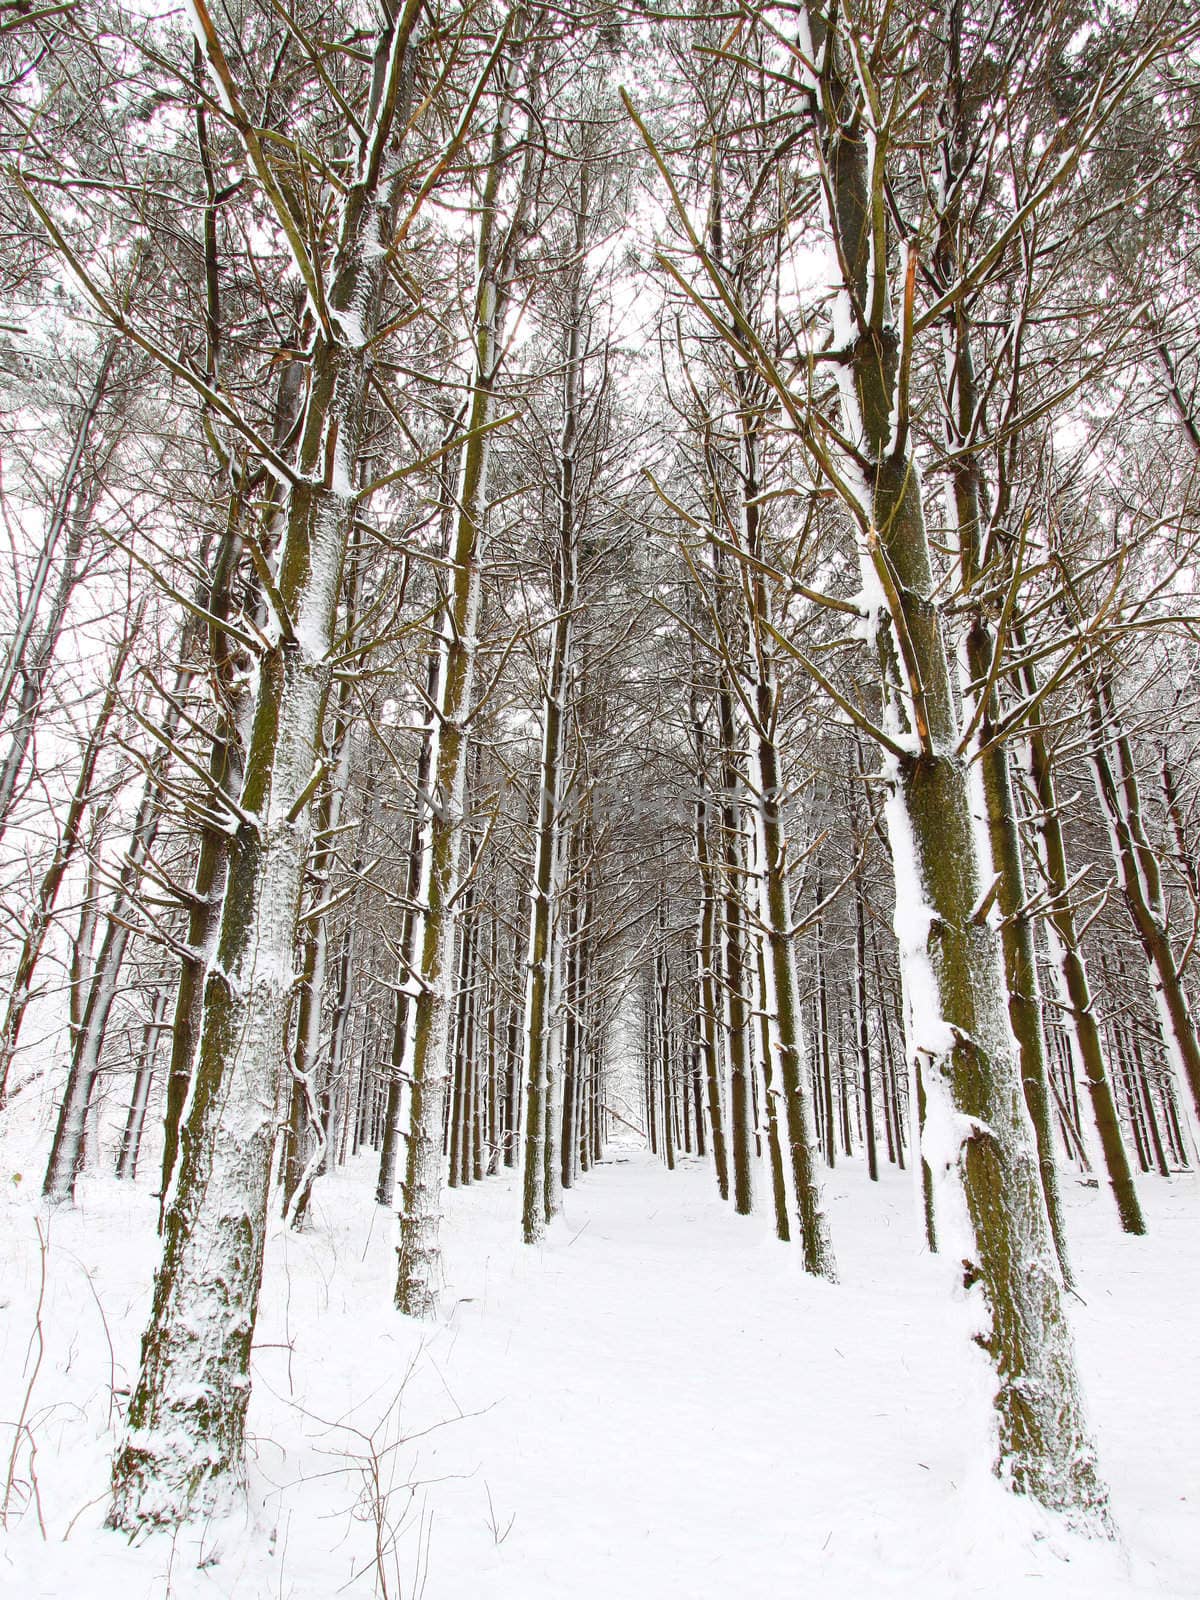 Snow covers a pine forest at Rock Cut State Park of northern Illinois.